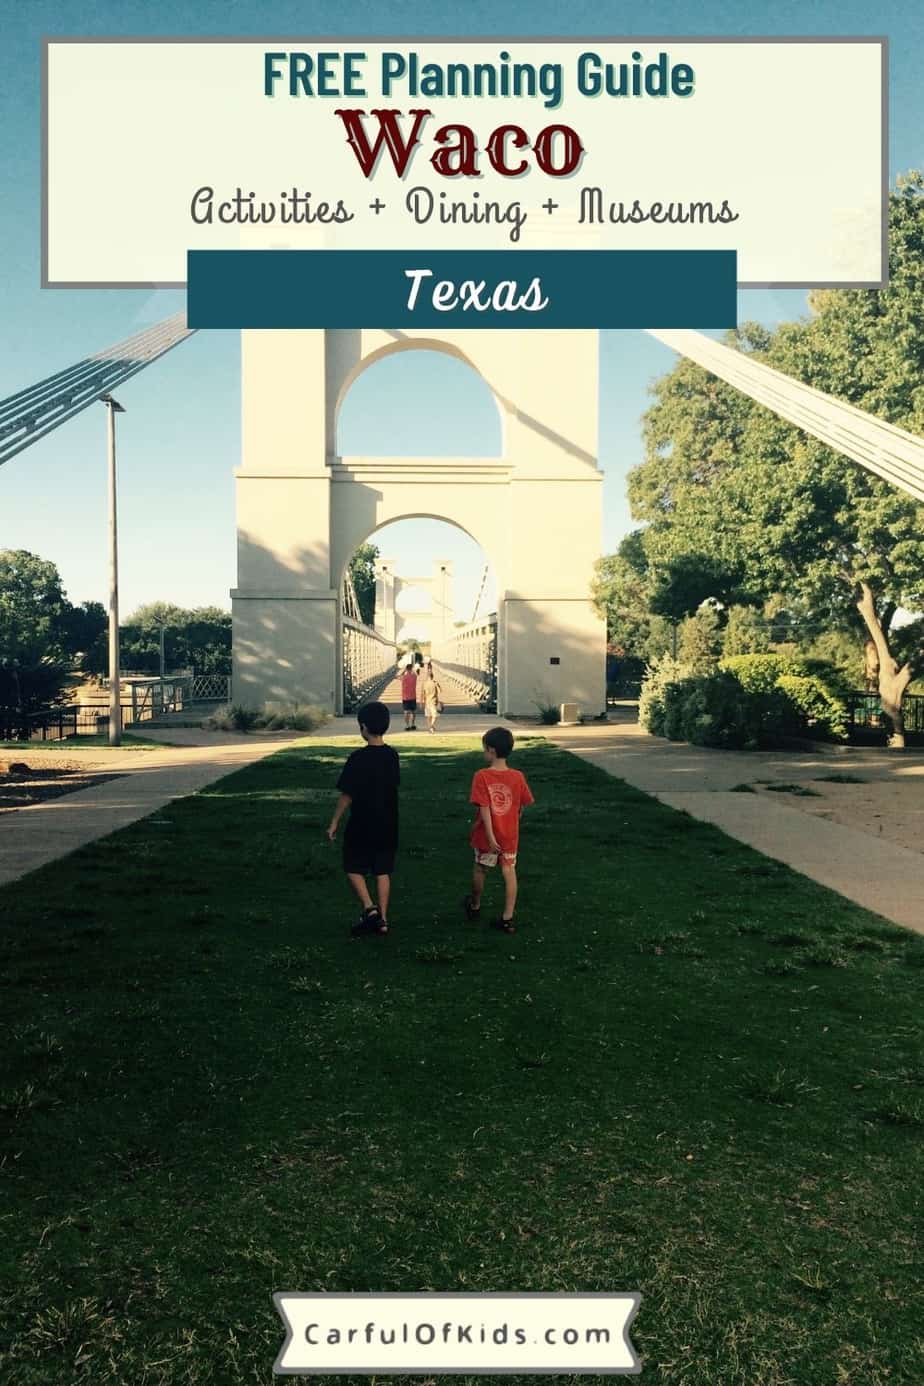 Head to Waco, Texas, for a weekend away with the family that doesn't include shopping. Here's a weekend itinerary full of family fun including the zoo, Dr. Pepper Museum, Waco Mammoth National Monument and more. What to do in Waco Texas with kids | Weekend Itinerary for Waco #Waco